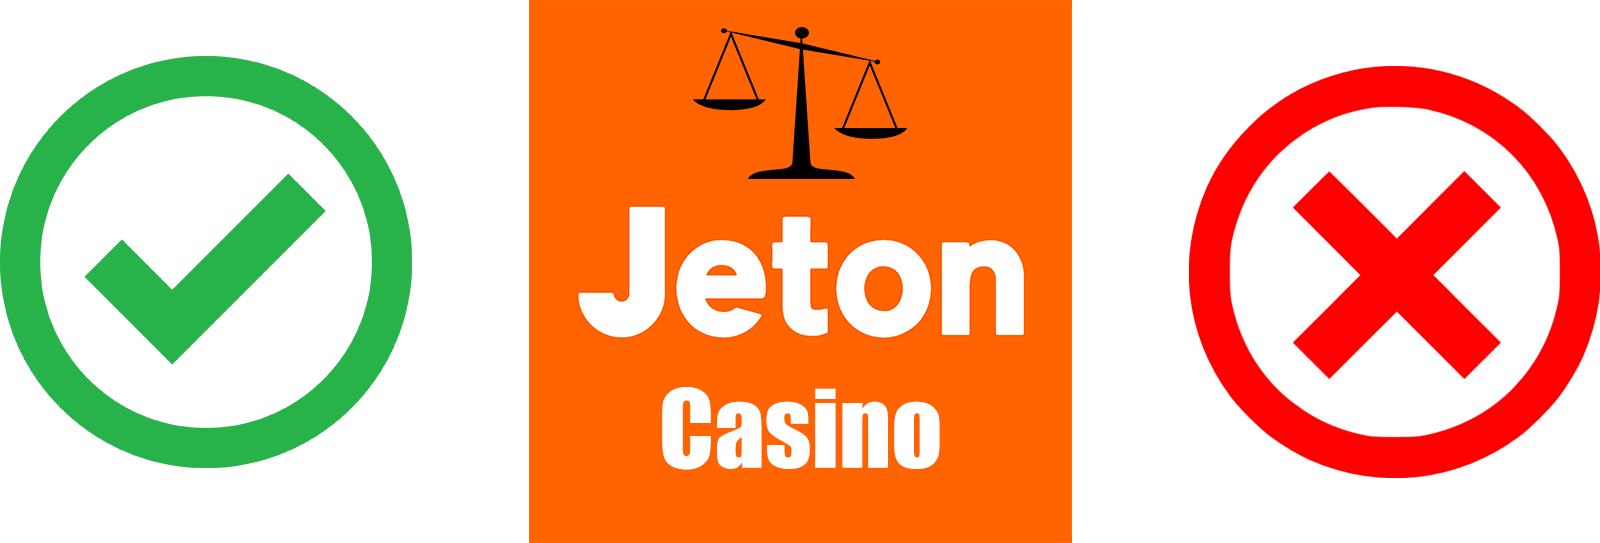 TOFCasino.com   Jetom Advantages and Disadvantages. iDeal big Cashback. Choose dedicated app and for mobile phone and then trust site